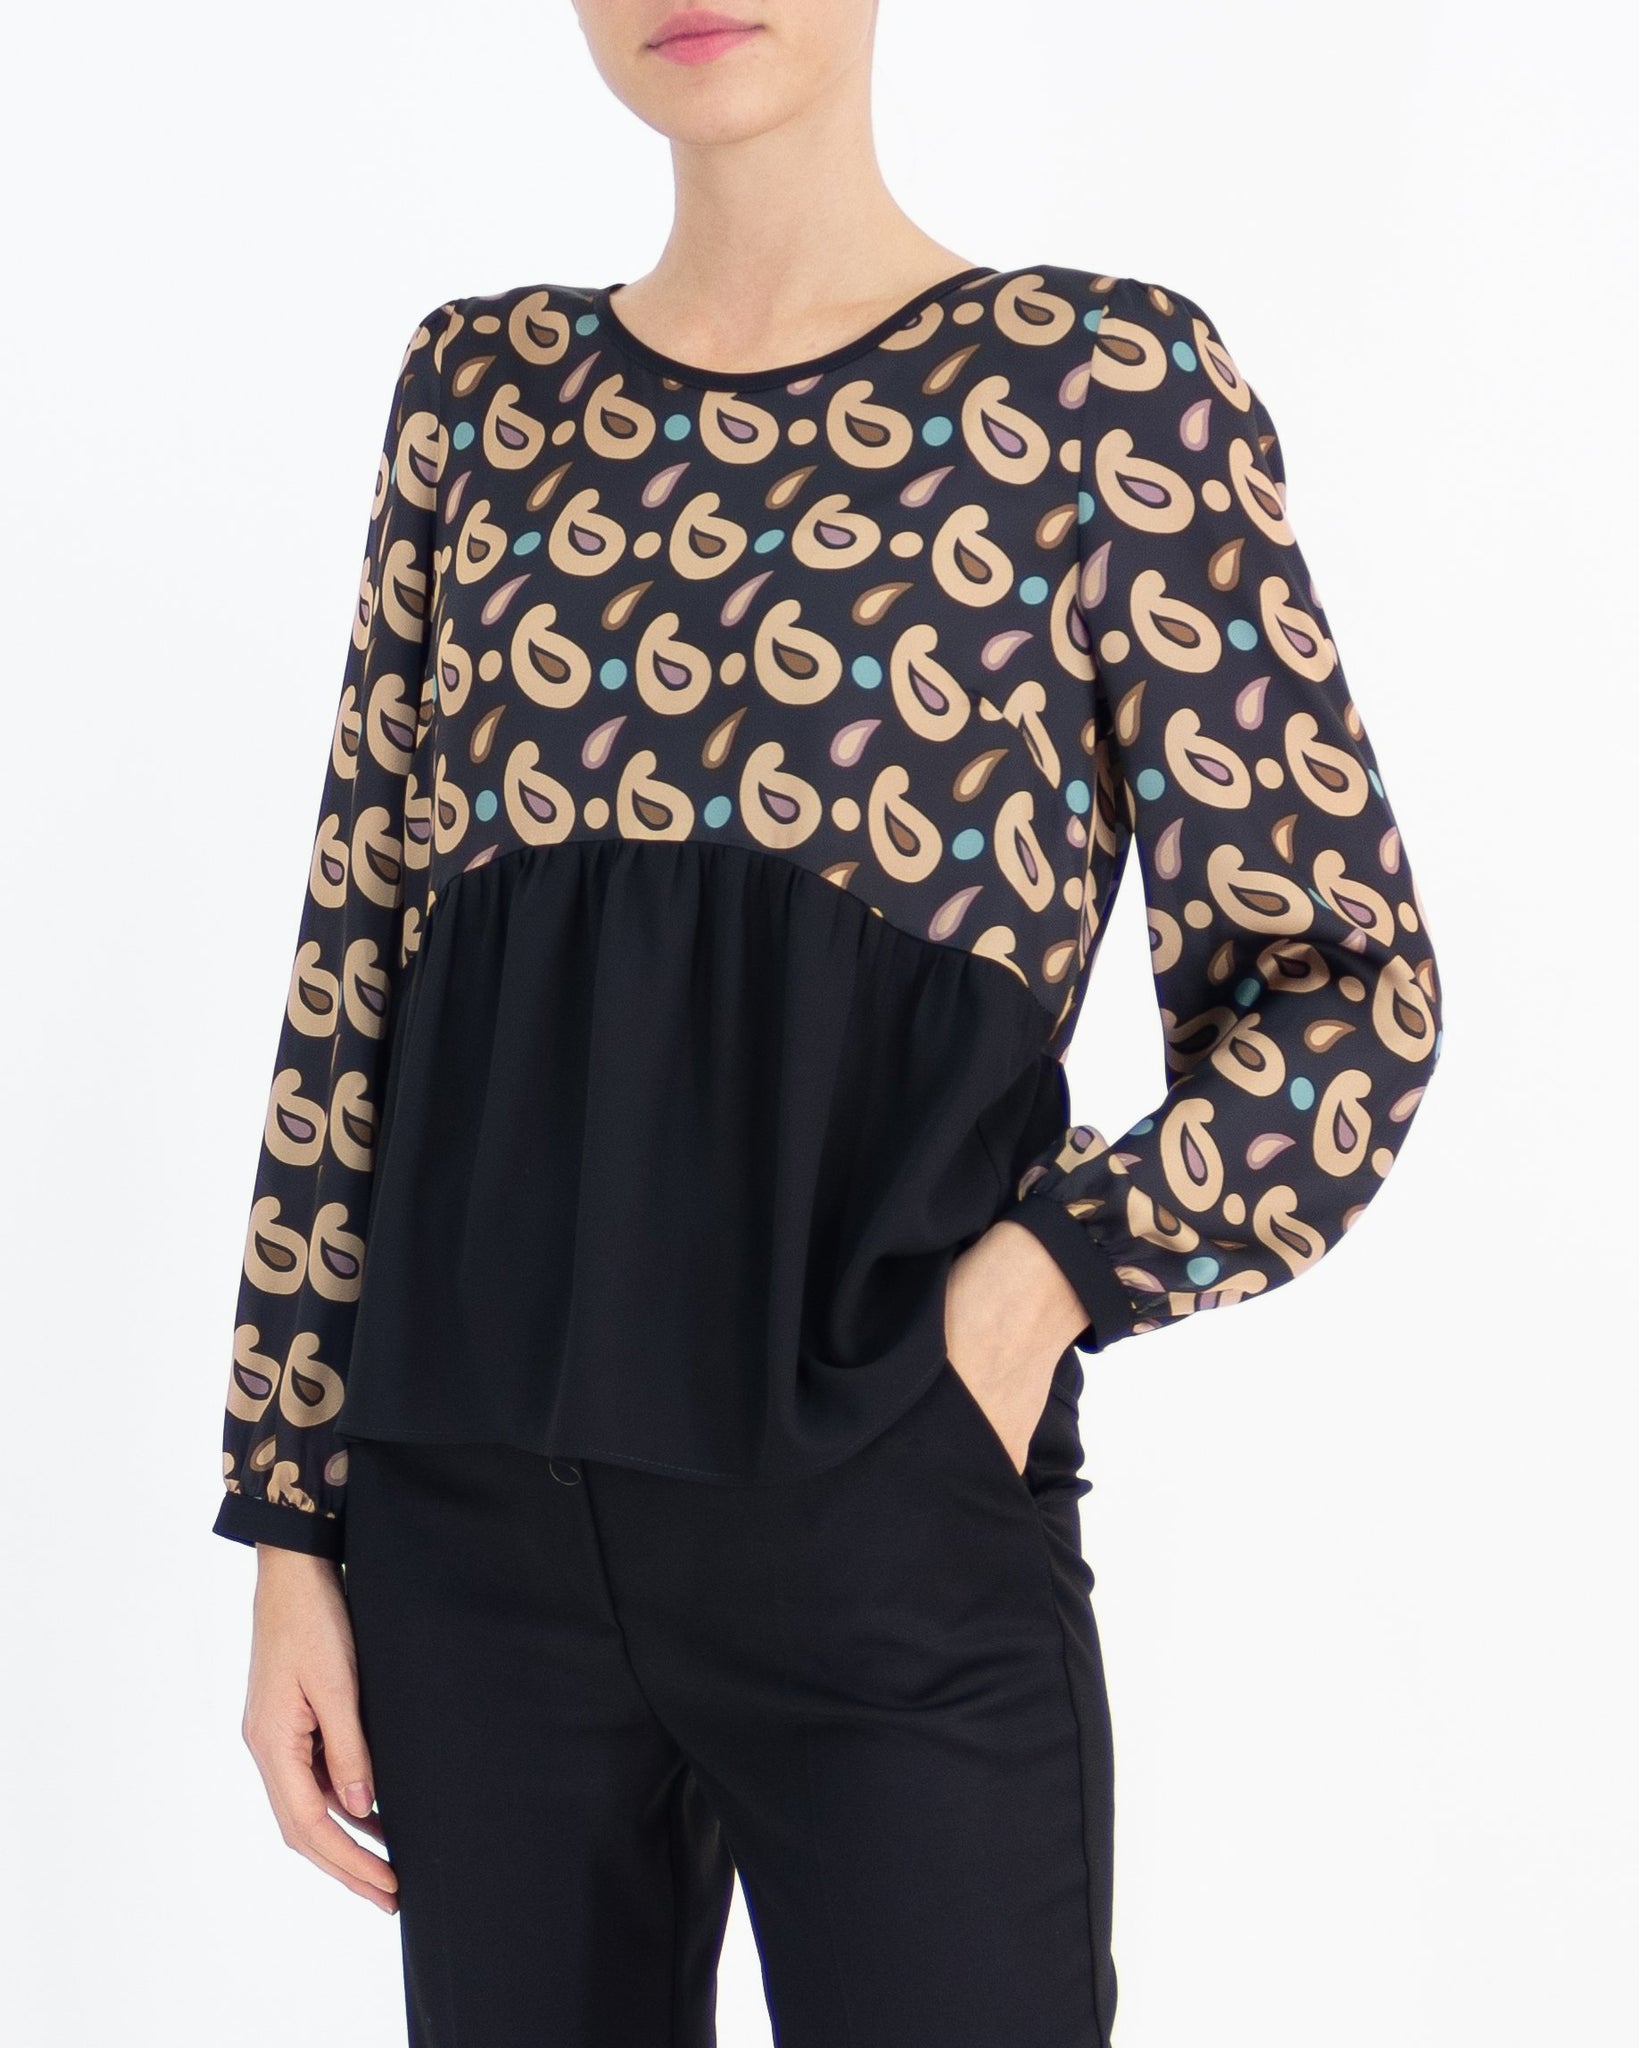 Paisley patterned blouse